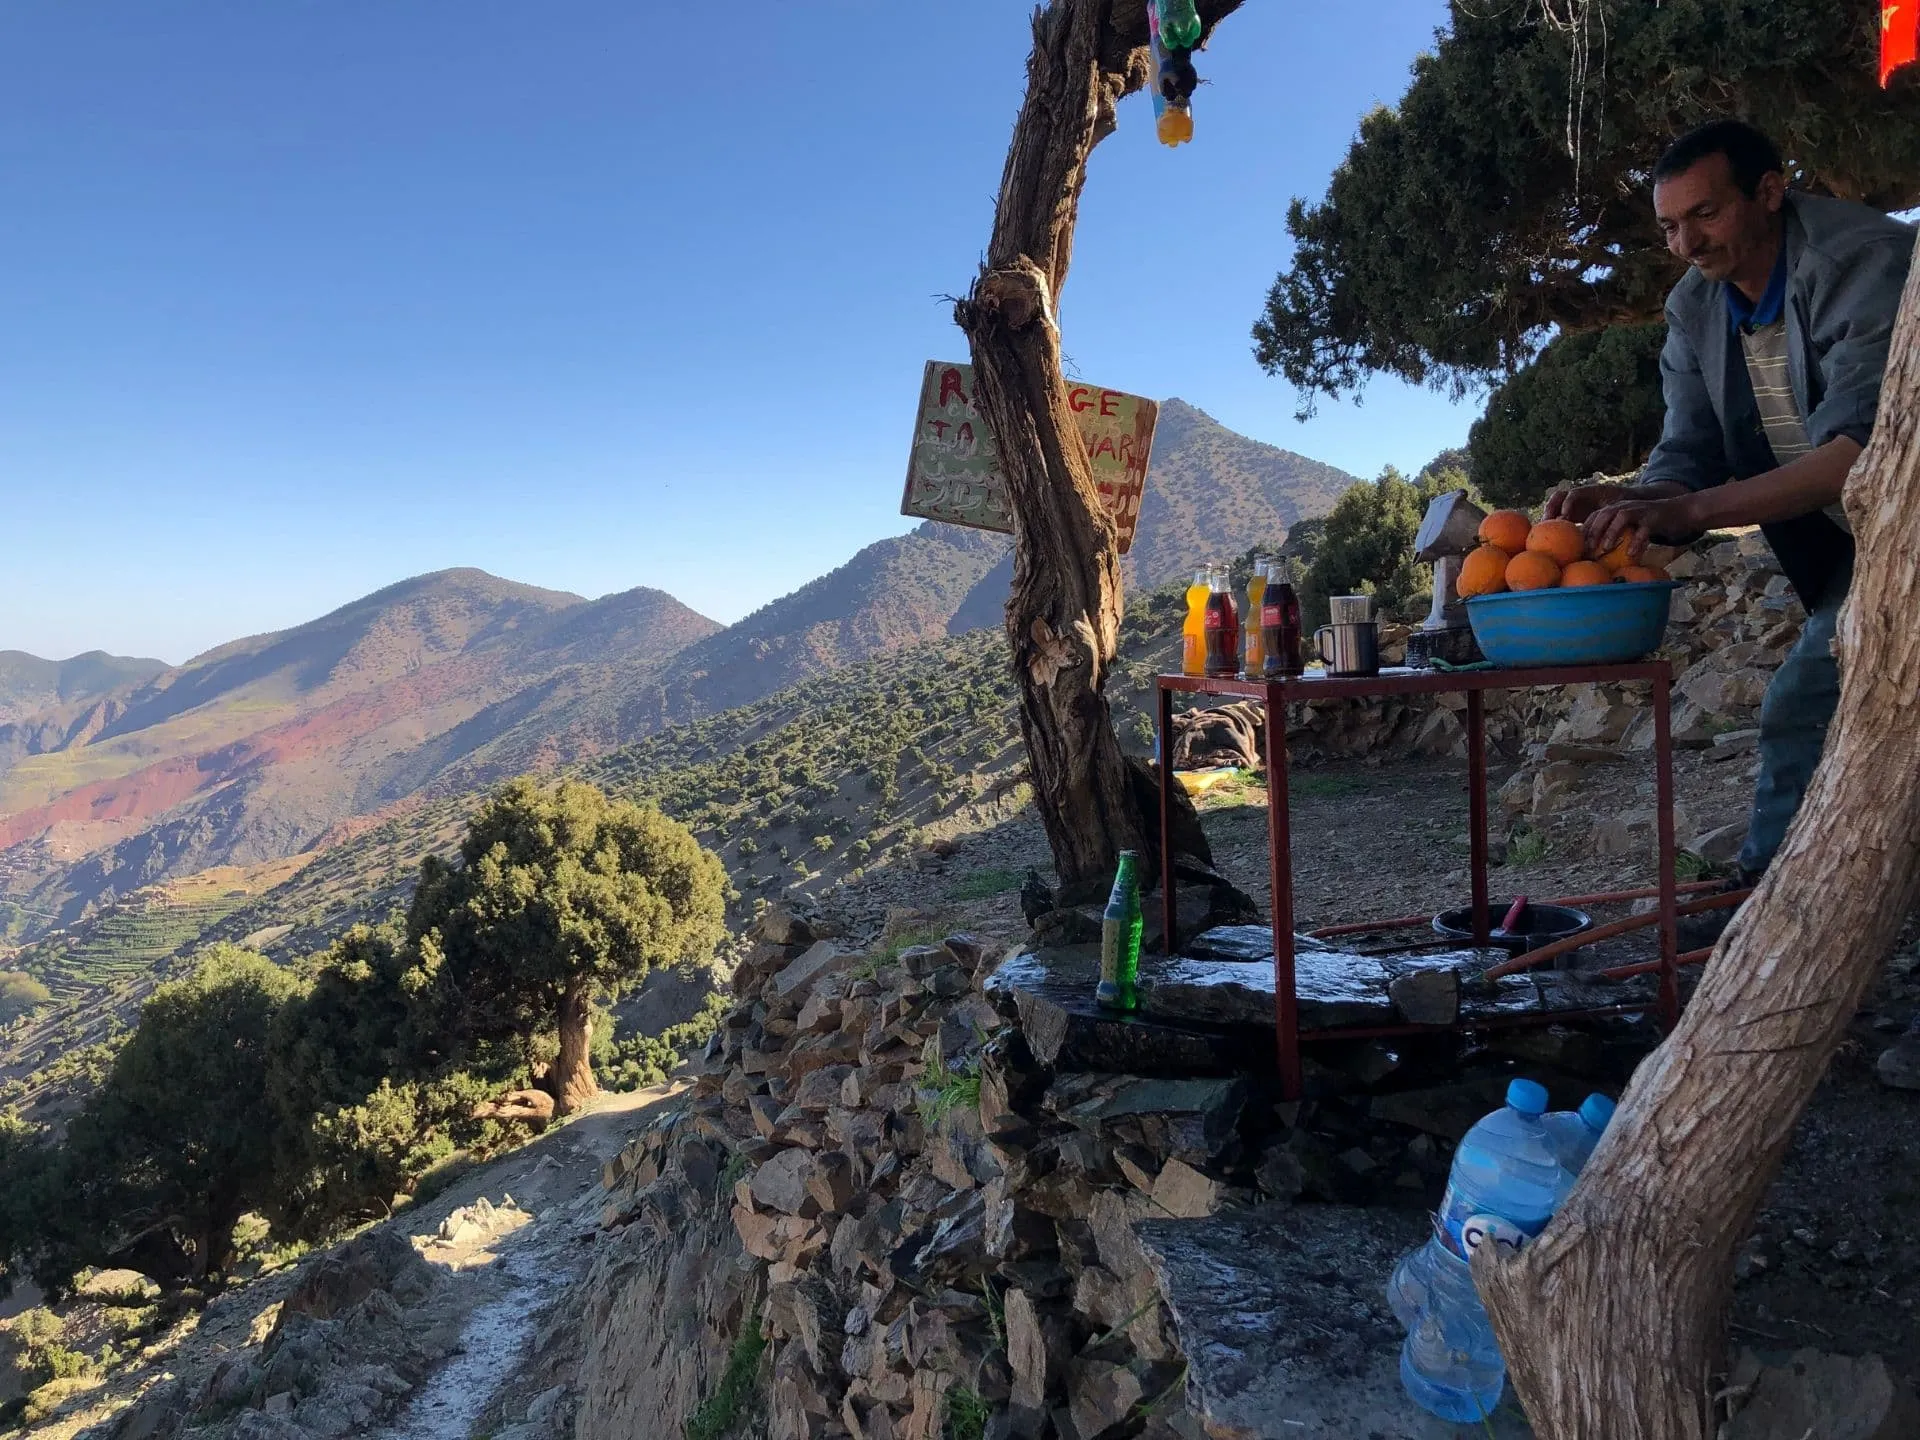 Tips 3: Be aware of the symptoms of altitude sickness when you climb Mount Toubkal